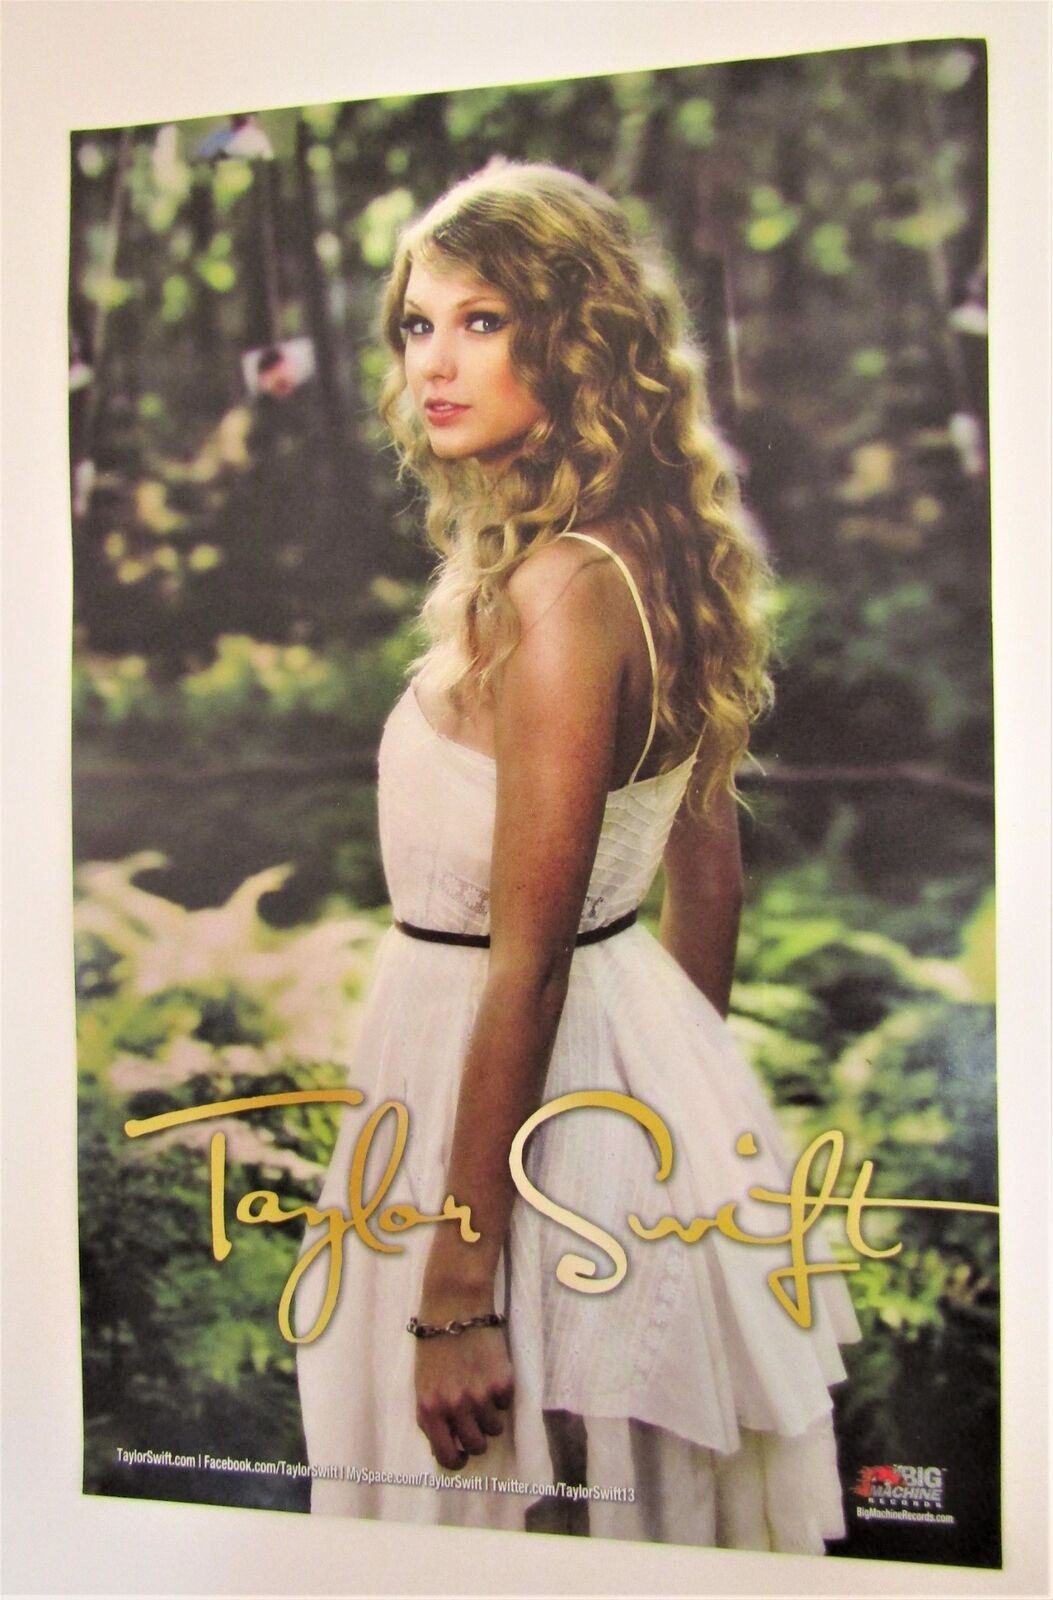 Taylor Swift 9.5"x 15" Promo Poster 2010 Promotional